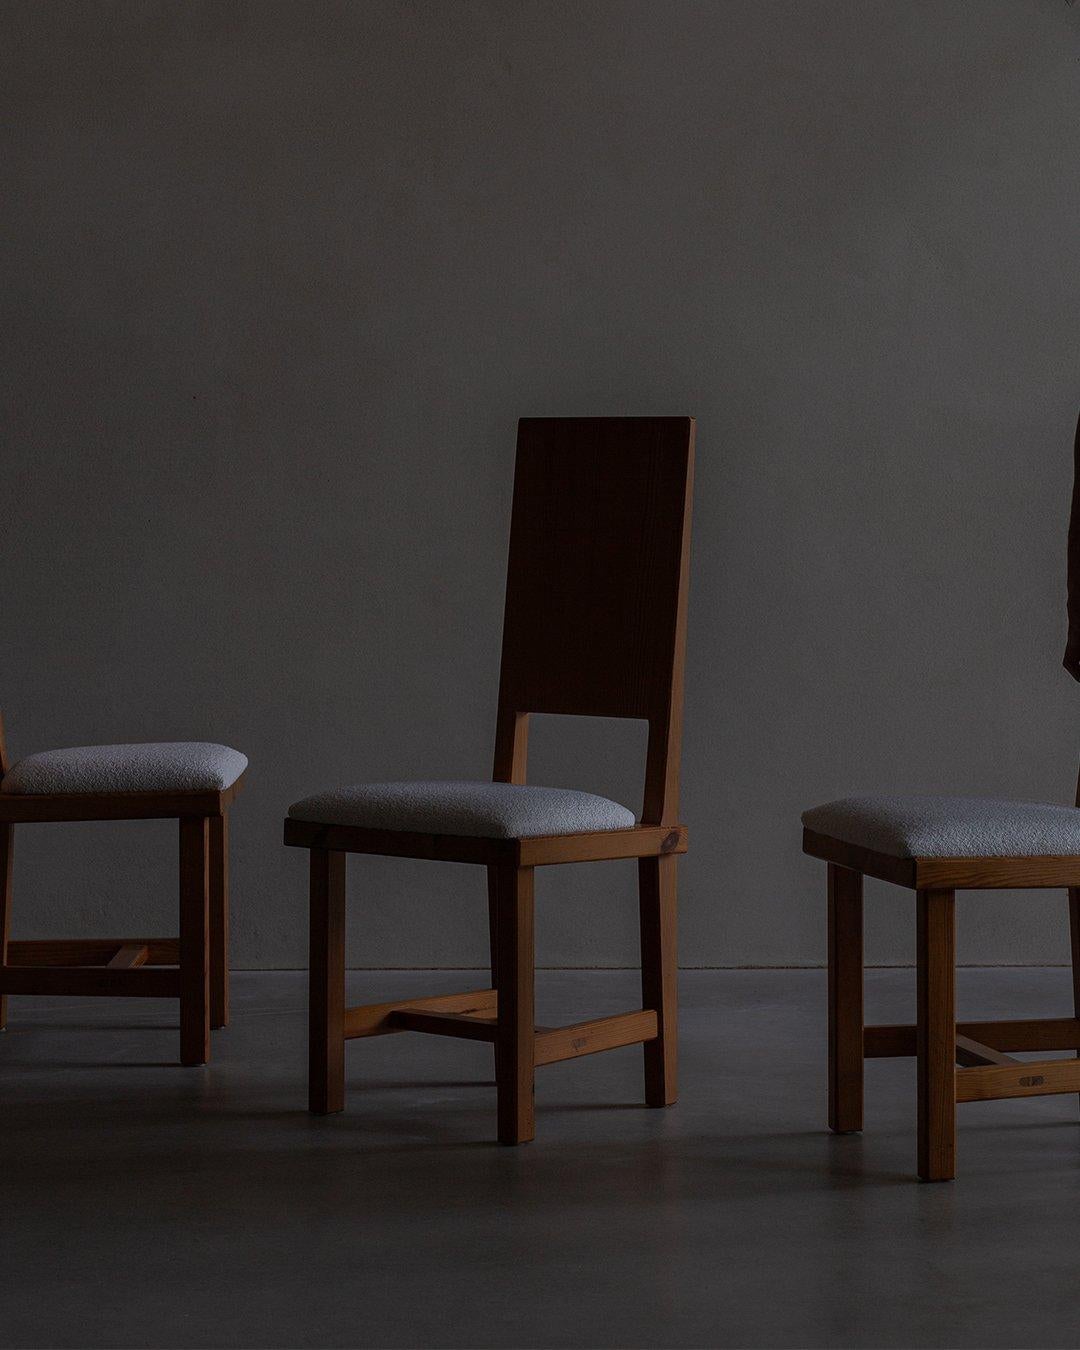 Set of 4 dining chairs by Göran Malmvall, reupholstered with a nice off-white bouclé. Göran Malmvall was a prominent figure in Swedish furniture design (1917-2001), establishing an influential legacy with his iconic pine chairs, known as model 553,